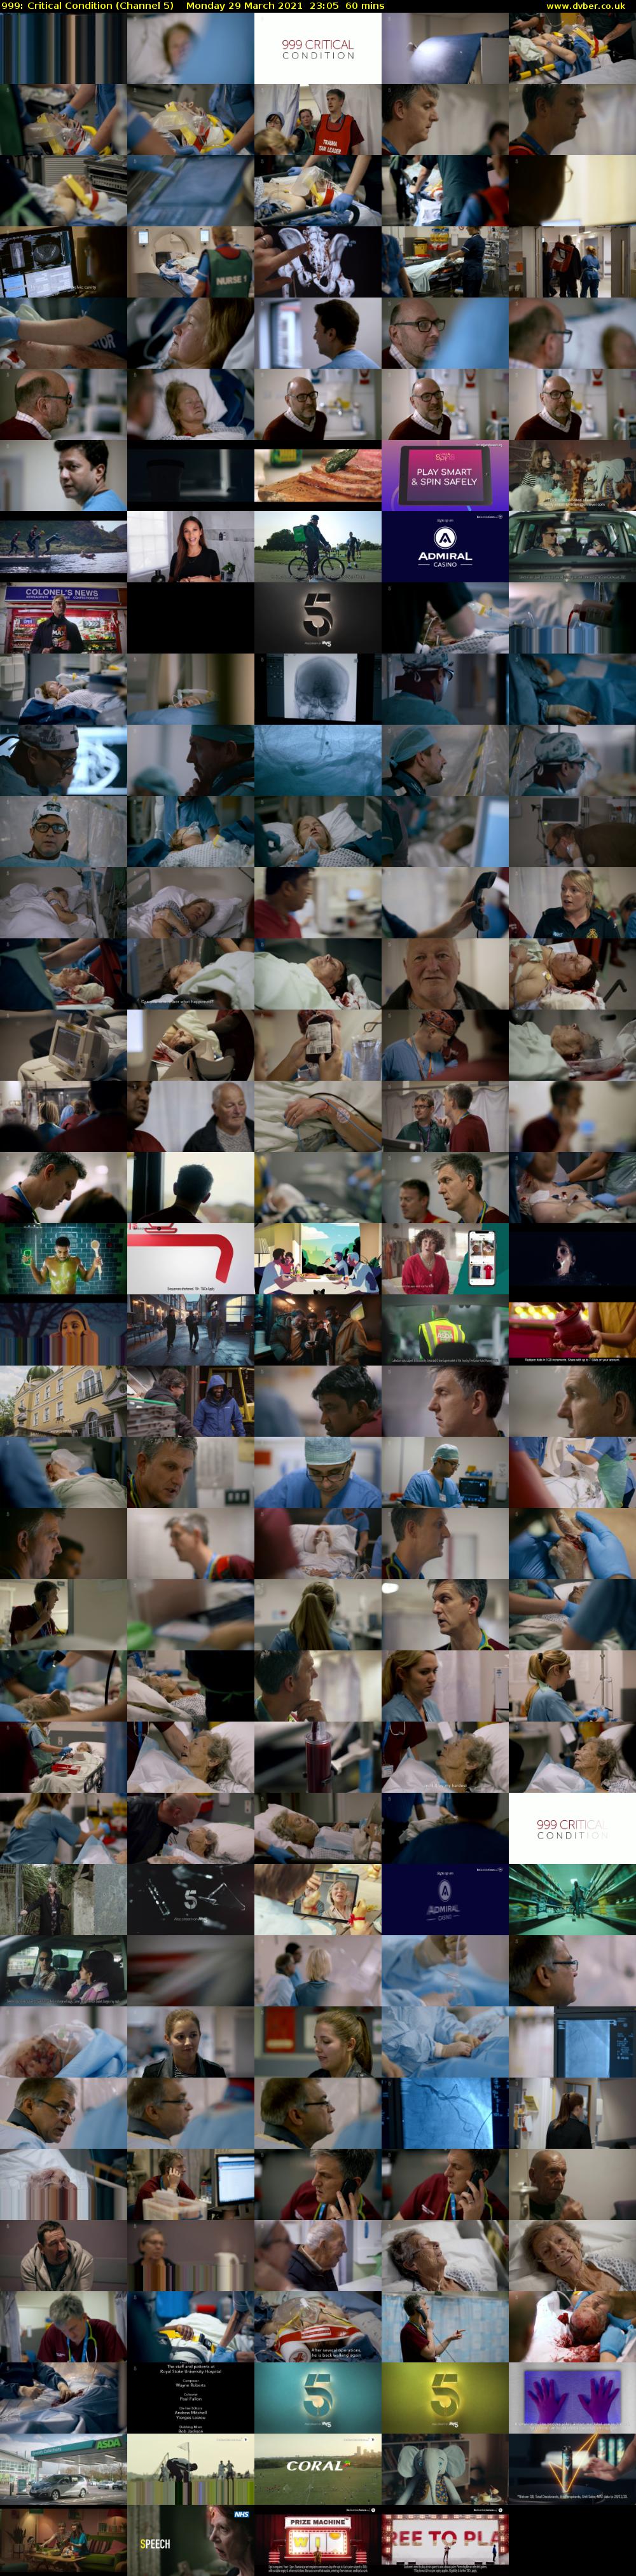 999: Critical Condition (Channel 5) Monday 29 March 2021 23:05 - 00:05